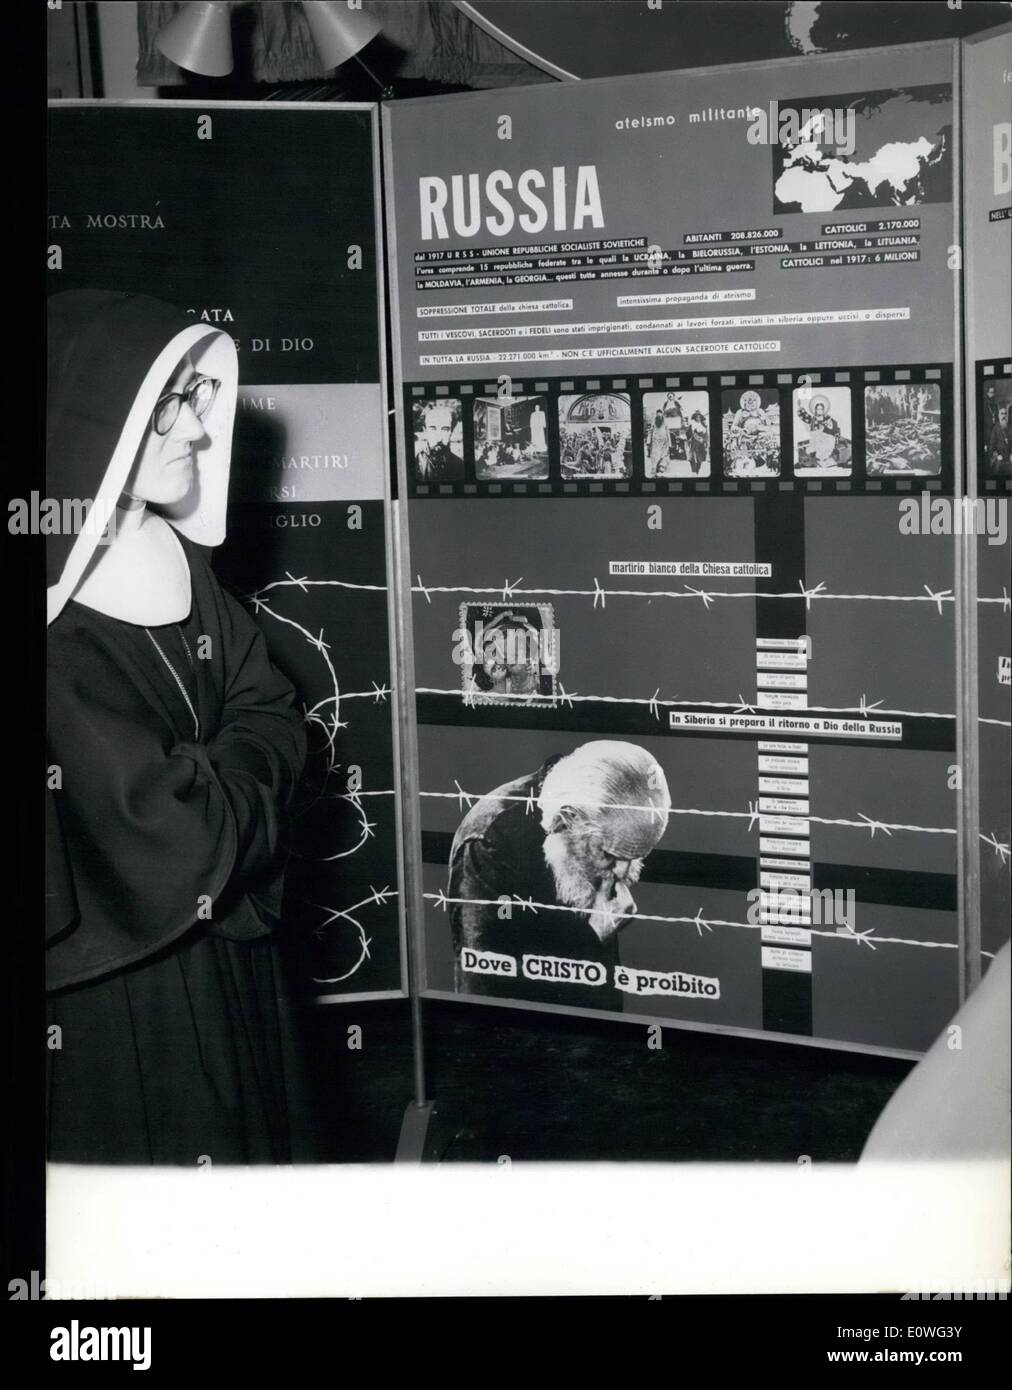 Nov. 11, 1962 - Rome, November 1962. Is open to the public in Rome a very interesting exhibition called the Church of Silence , whose pictures and writing document the oppression against the Catholic Church under the Communist party in the countries of the iron curtainÃ Stock Photo